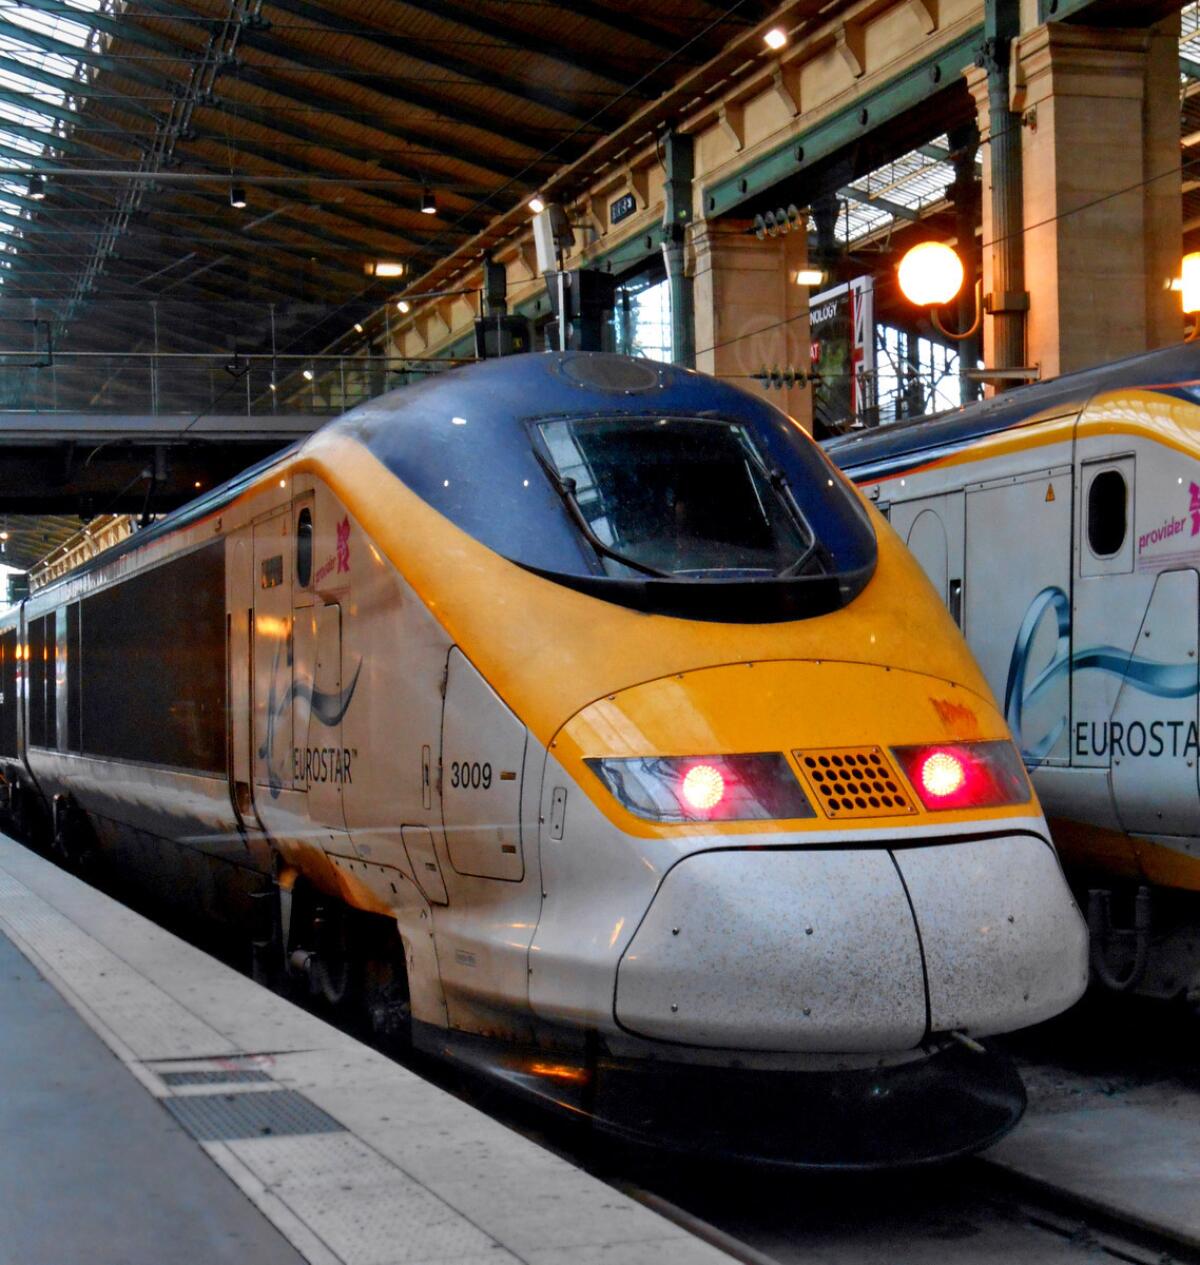 Eurostar trains offer tickets starting at $99 each way from London to Paris or Brussels.